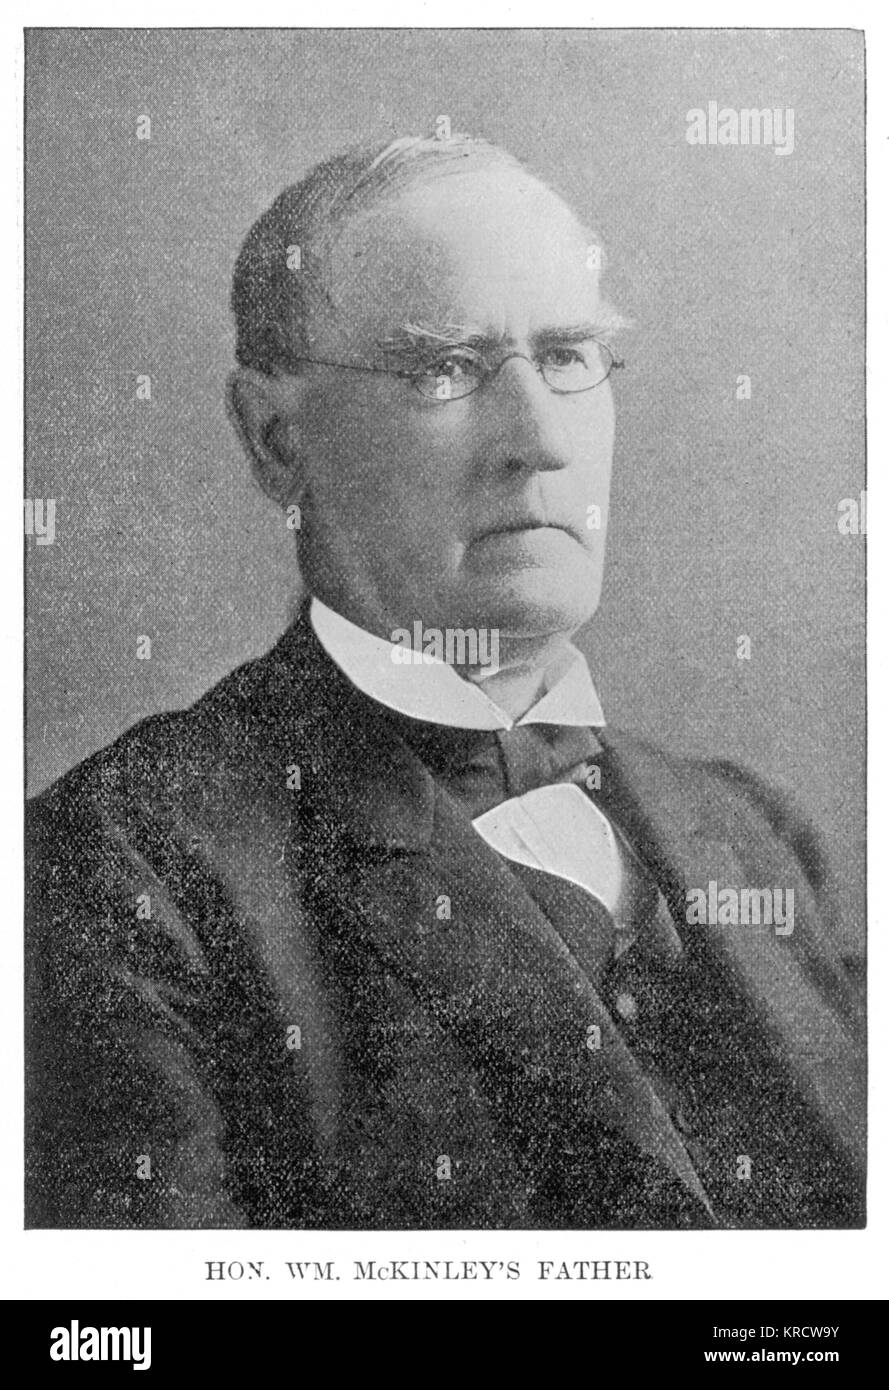 WILLIAM McKINLEY'S FATHER William McKinley, father of the 25th President of the United States. Date: 1807 - 1892 Stock Photo